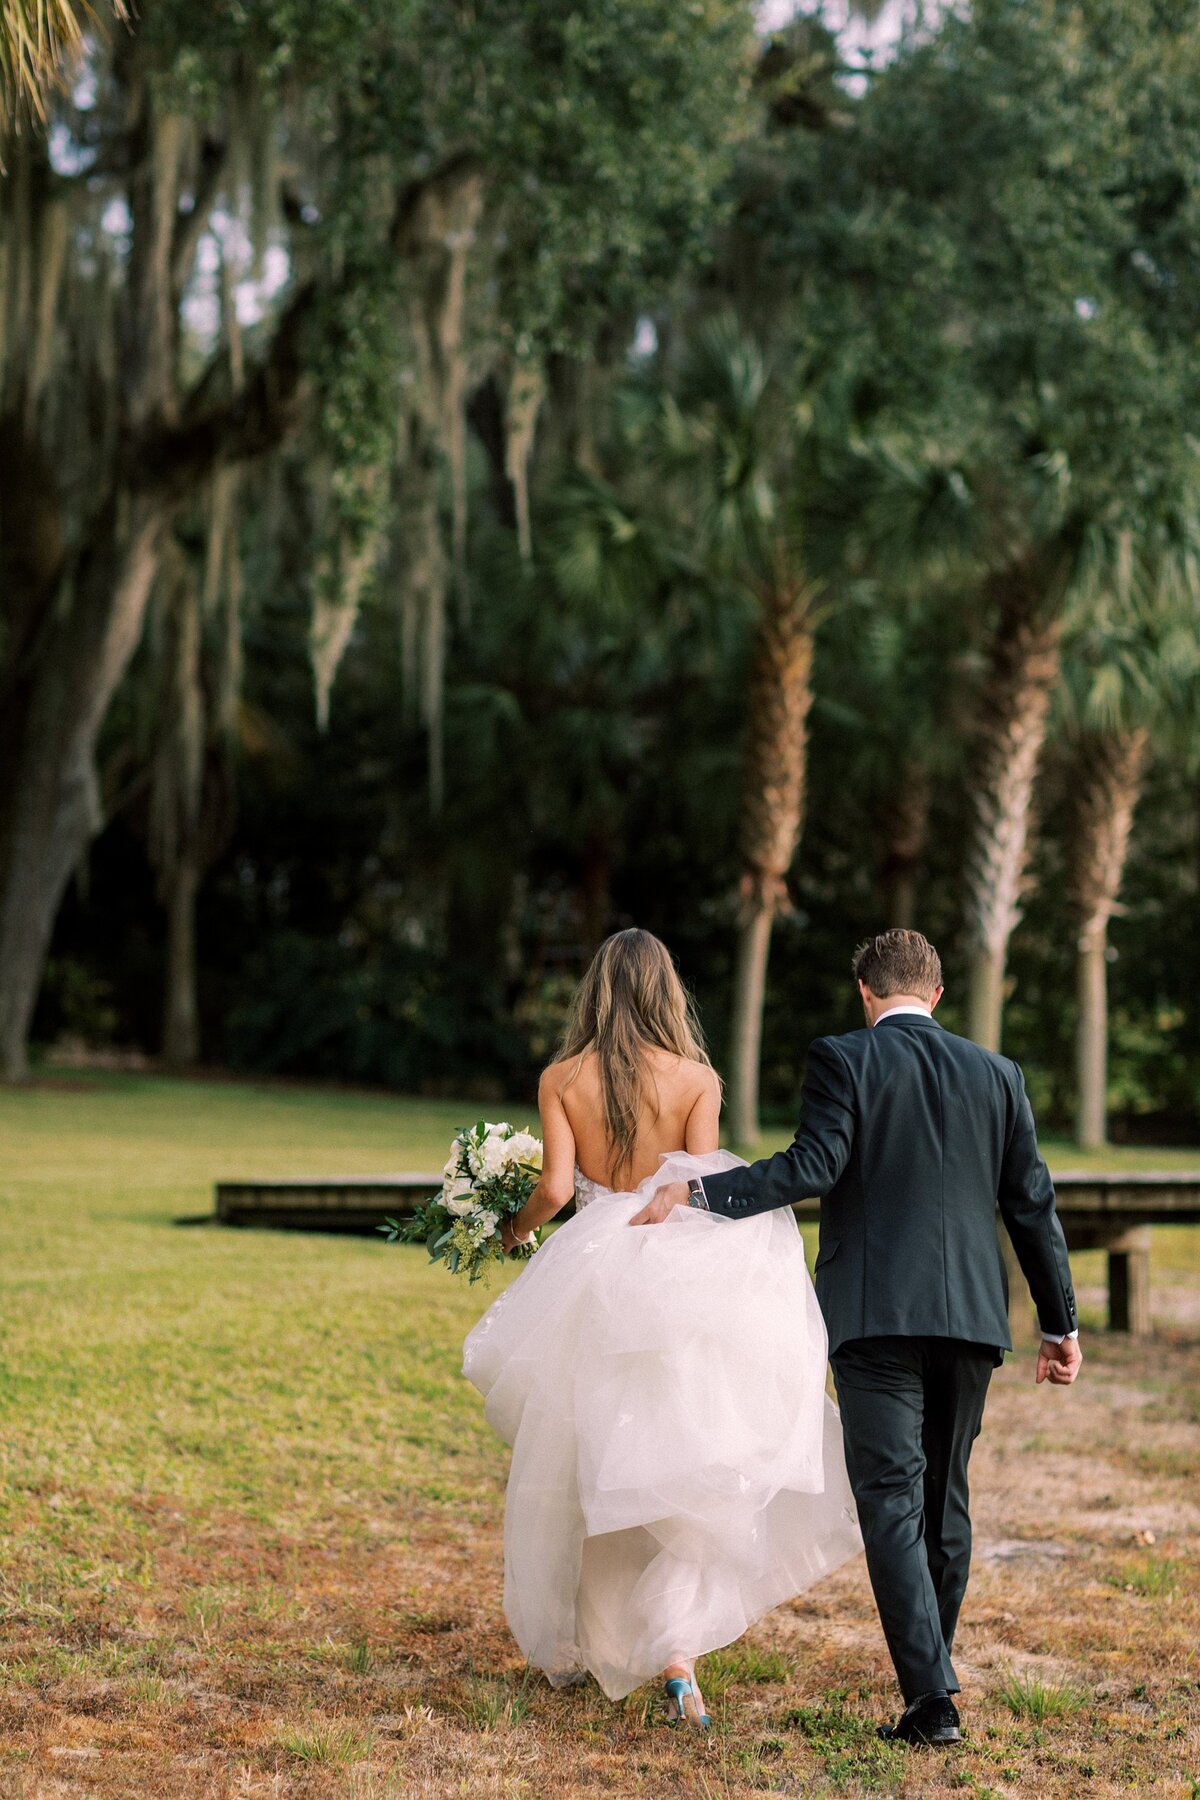 A wedding at a private estate in Tallahassee, FL - 16